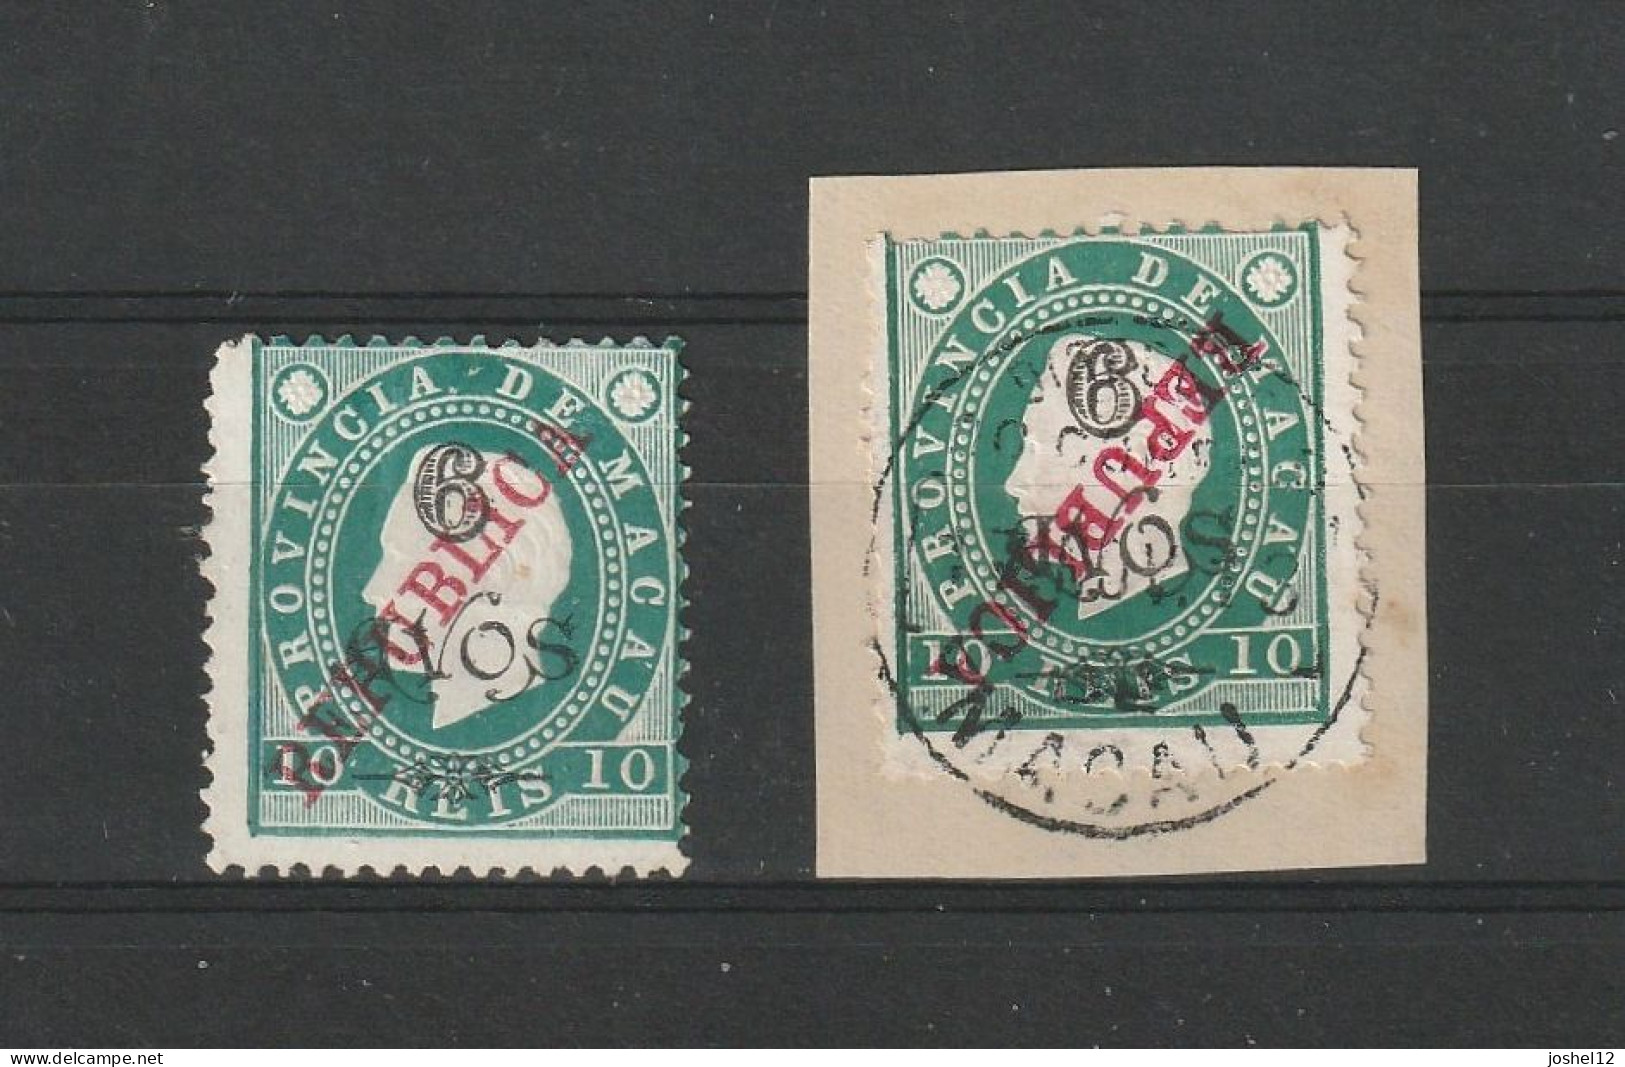 Macau Macao 1913 Luis 6a/10r Overprint REPUBLICA Inverted. Used. Fine - Used Stamps